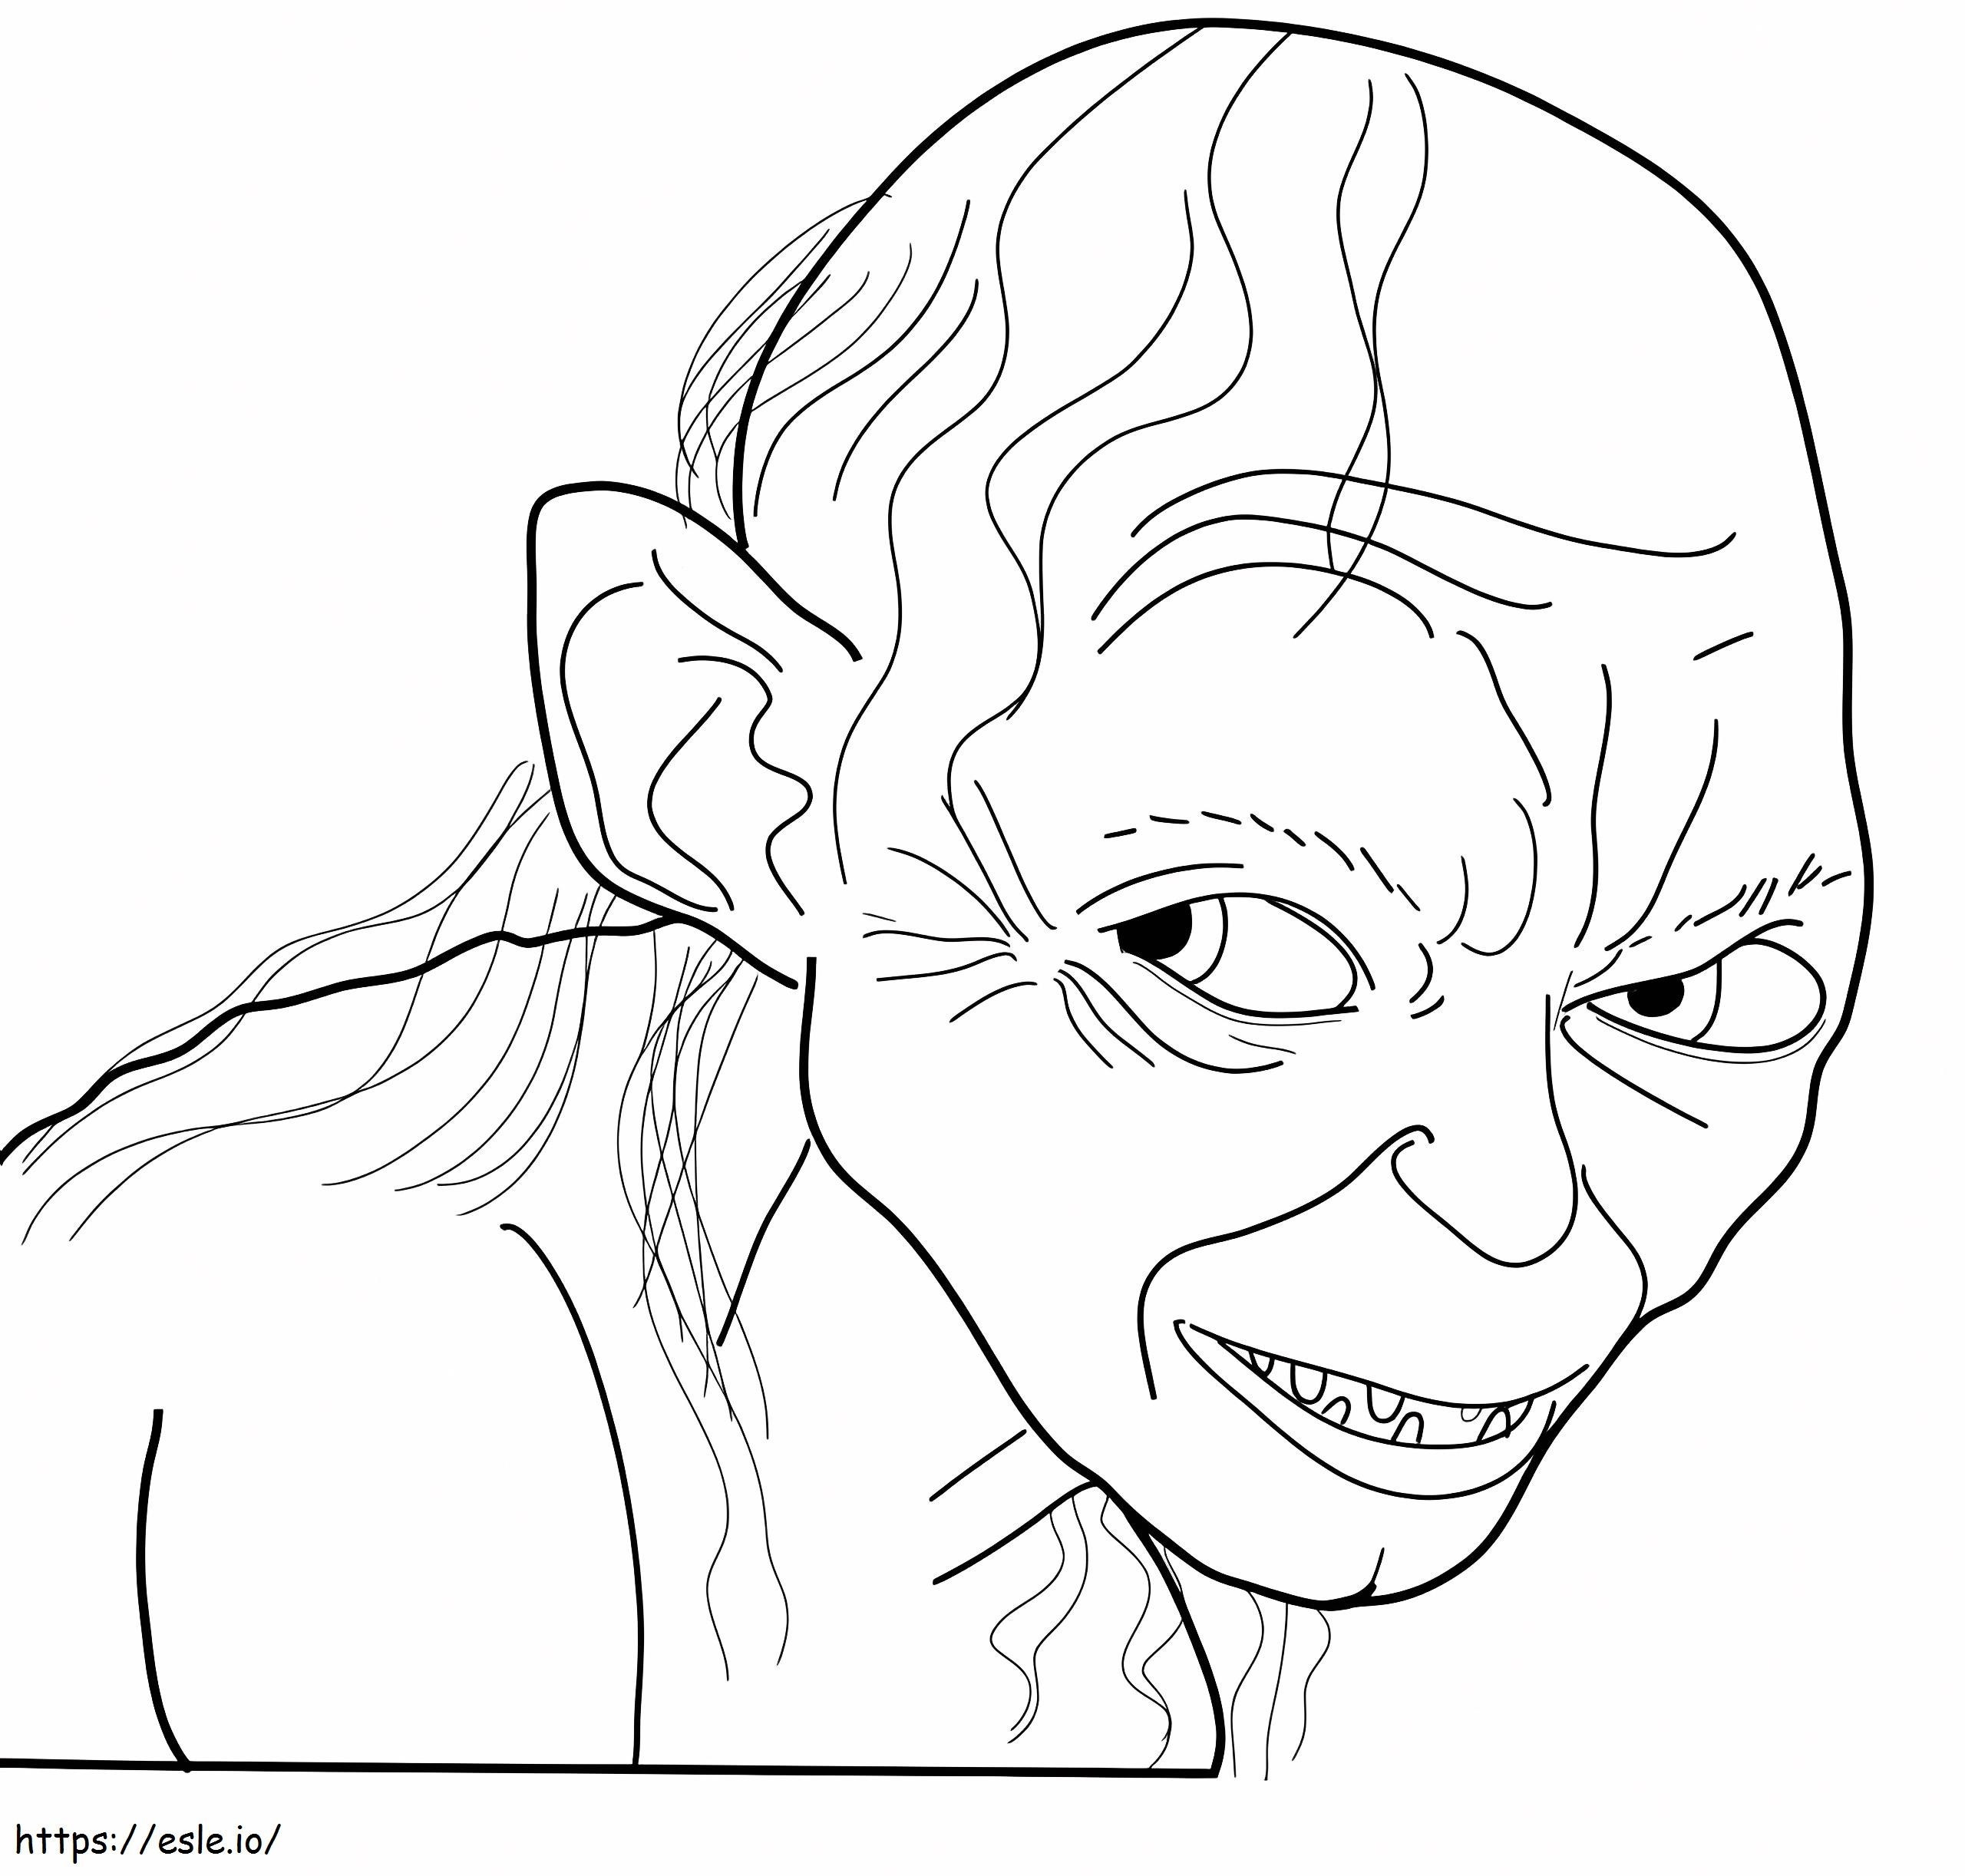 Gollum From The Lord Of The Rings coloring page